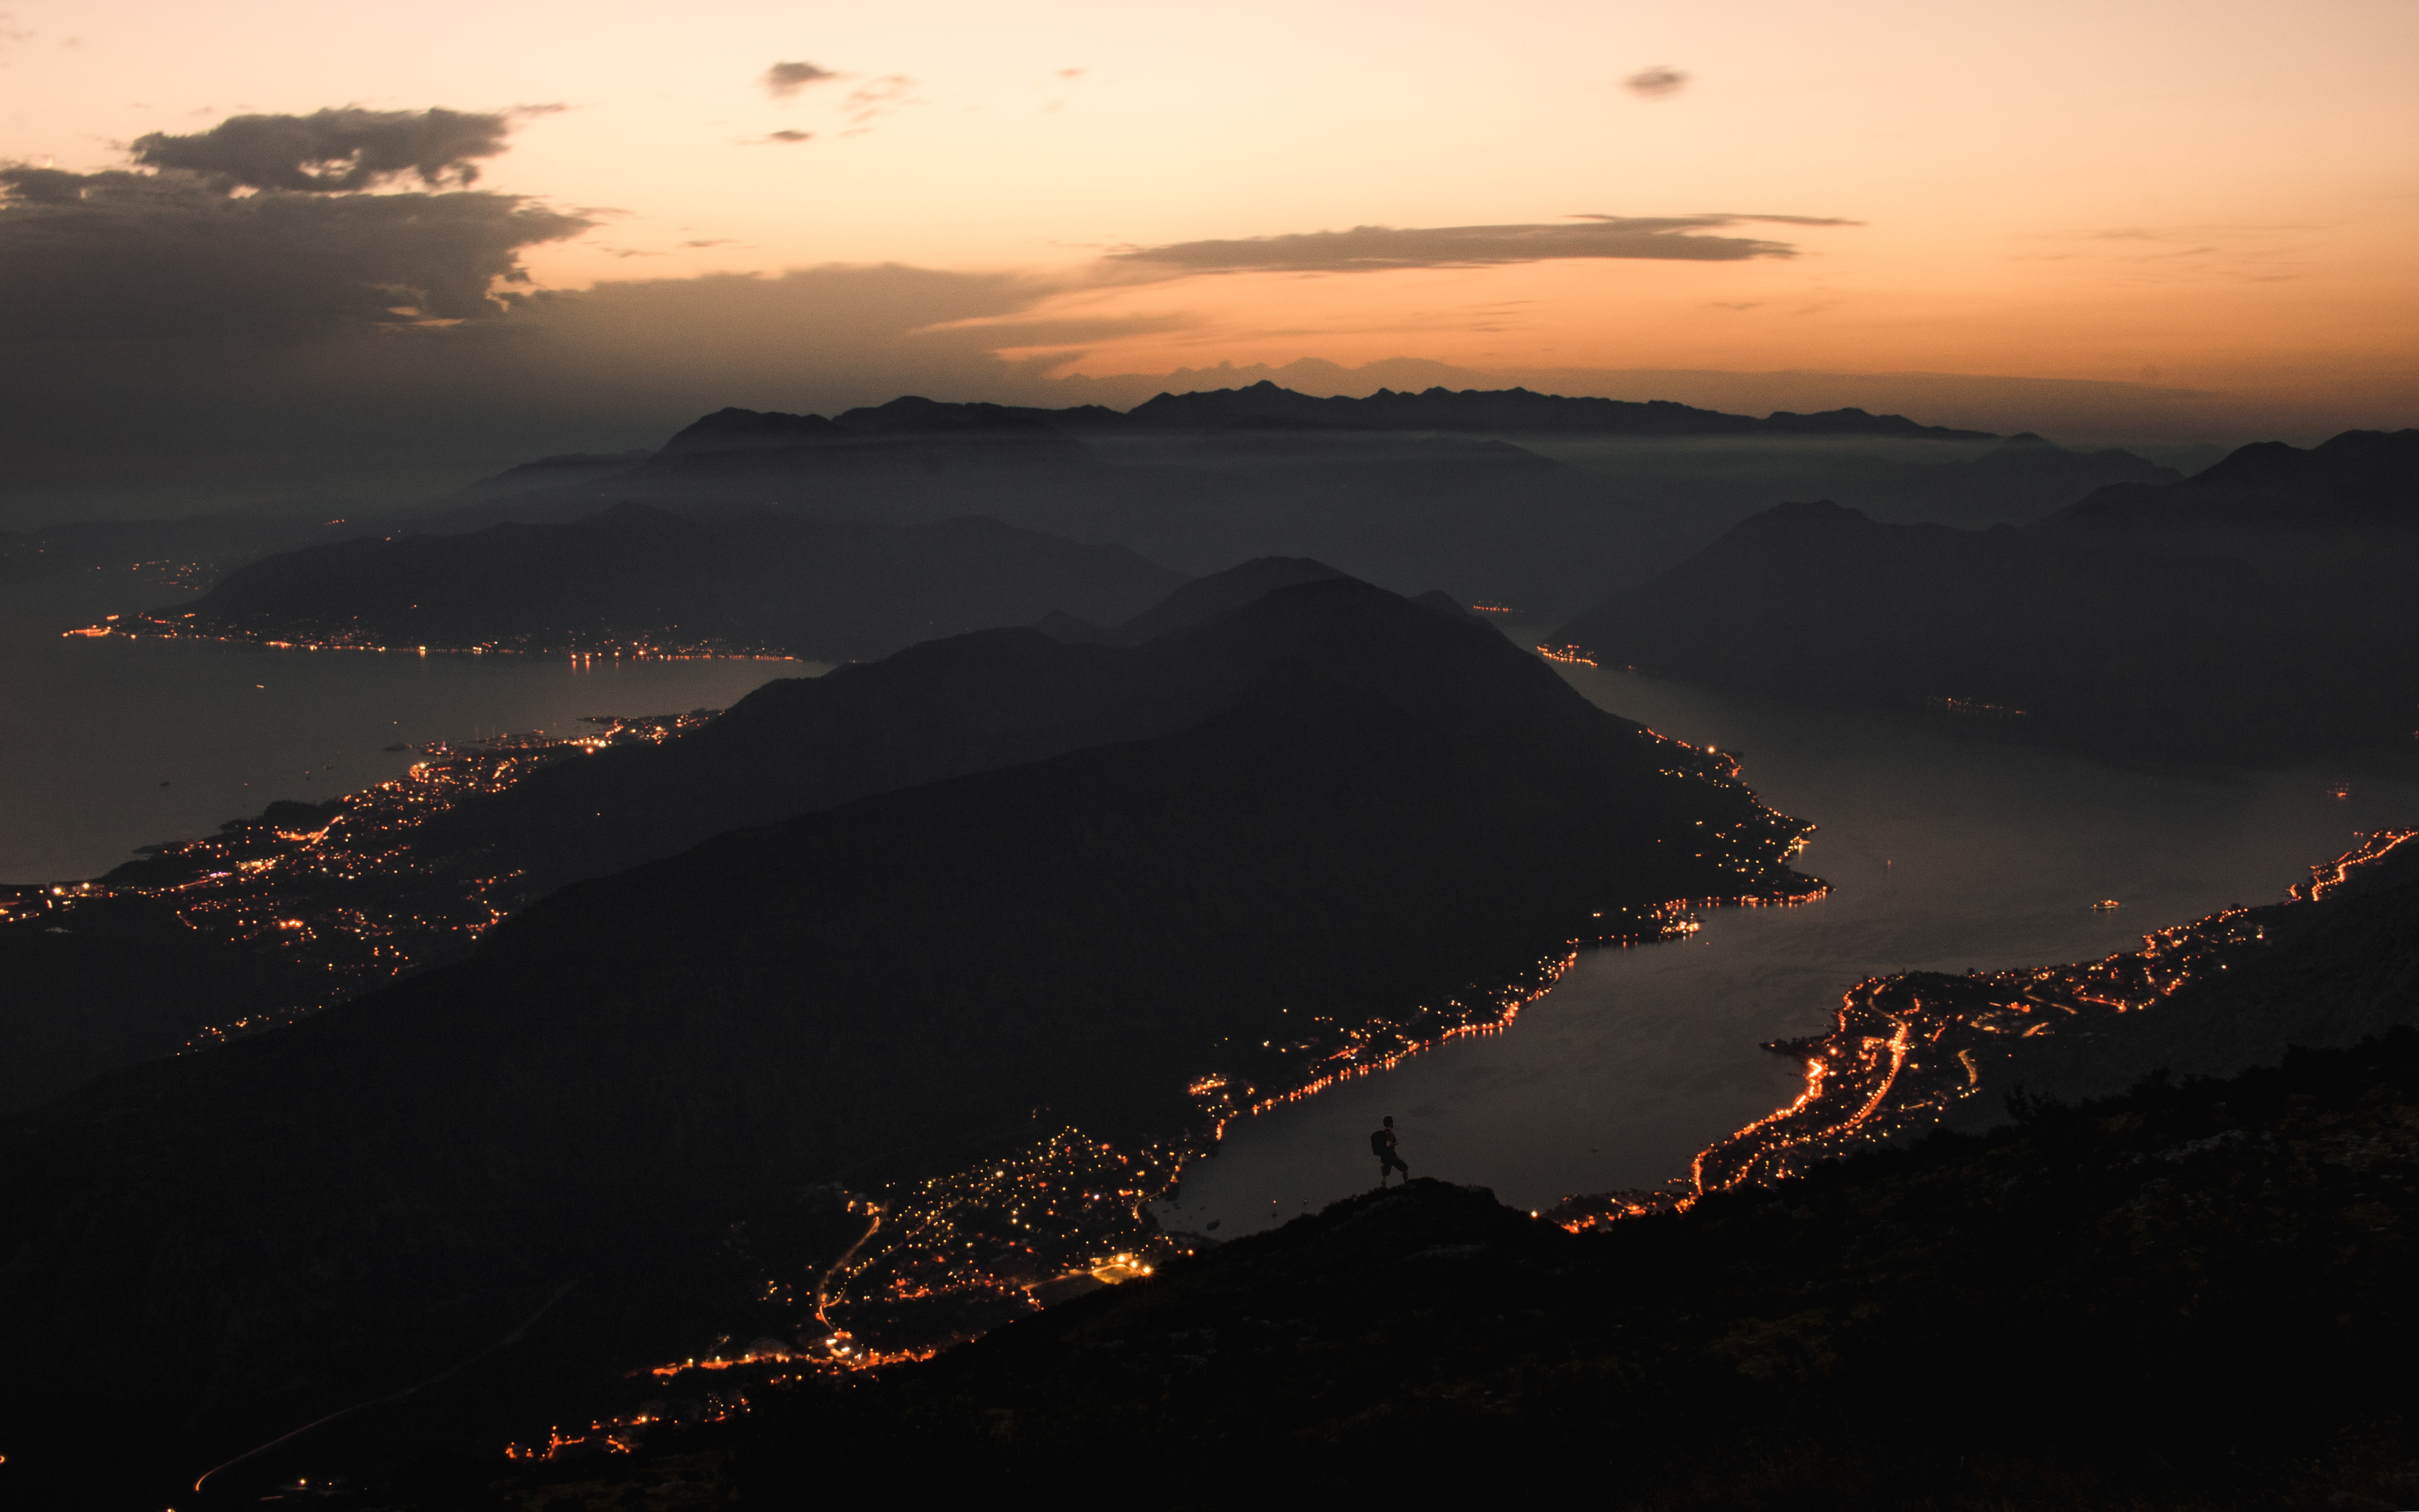 lights, night, dark, mountains, coast, city, view from above